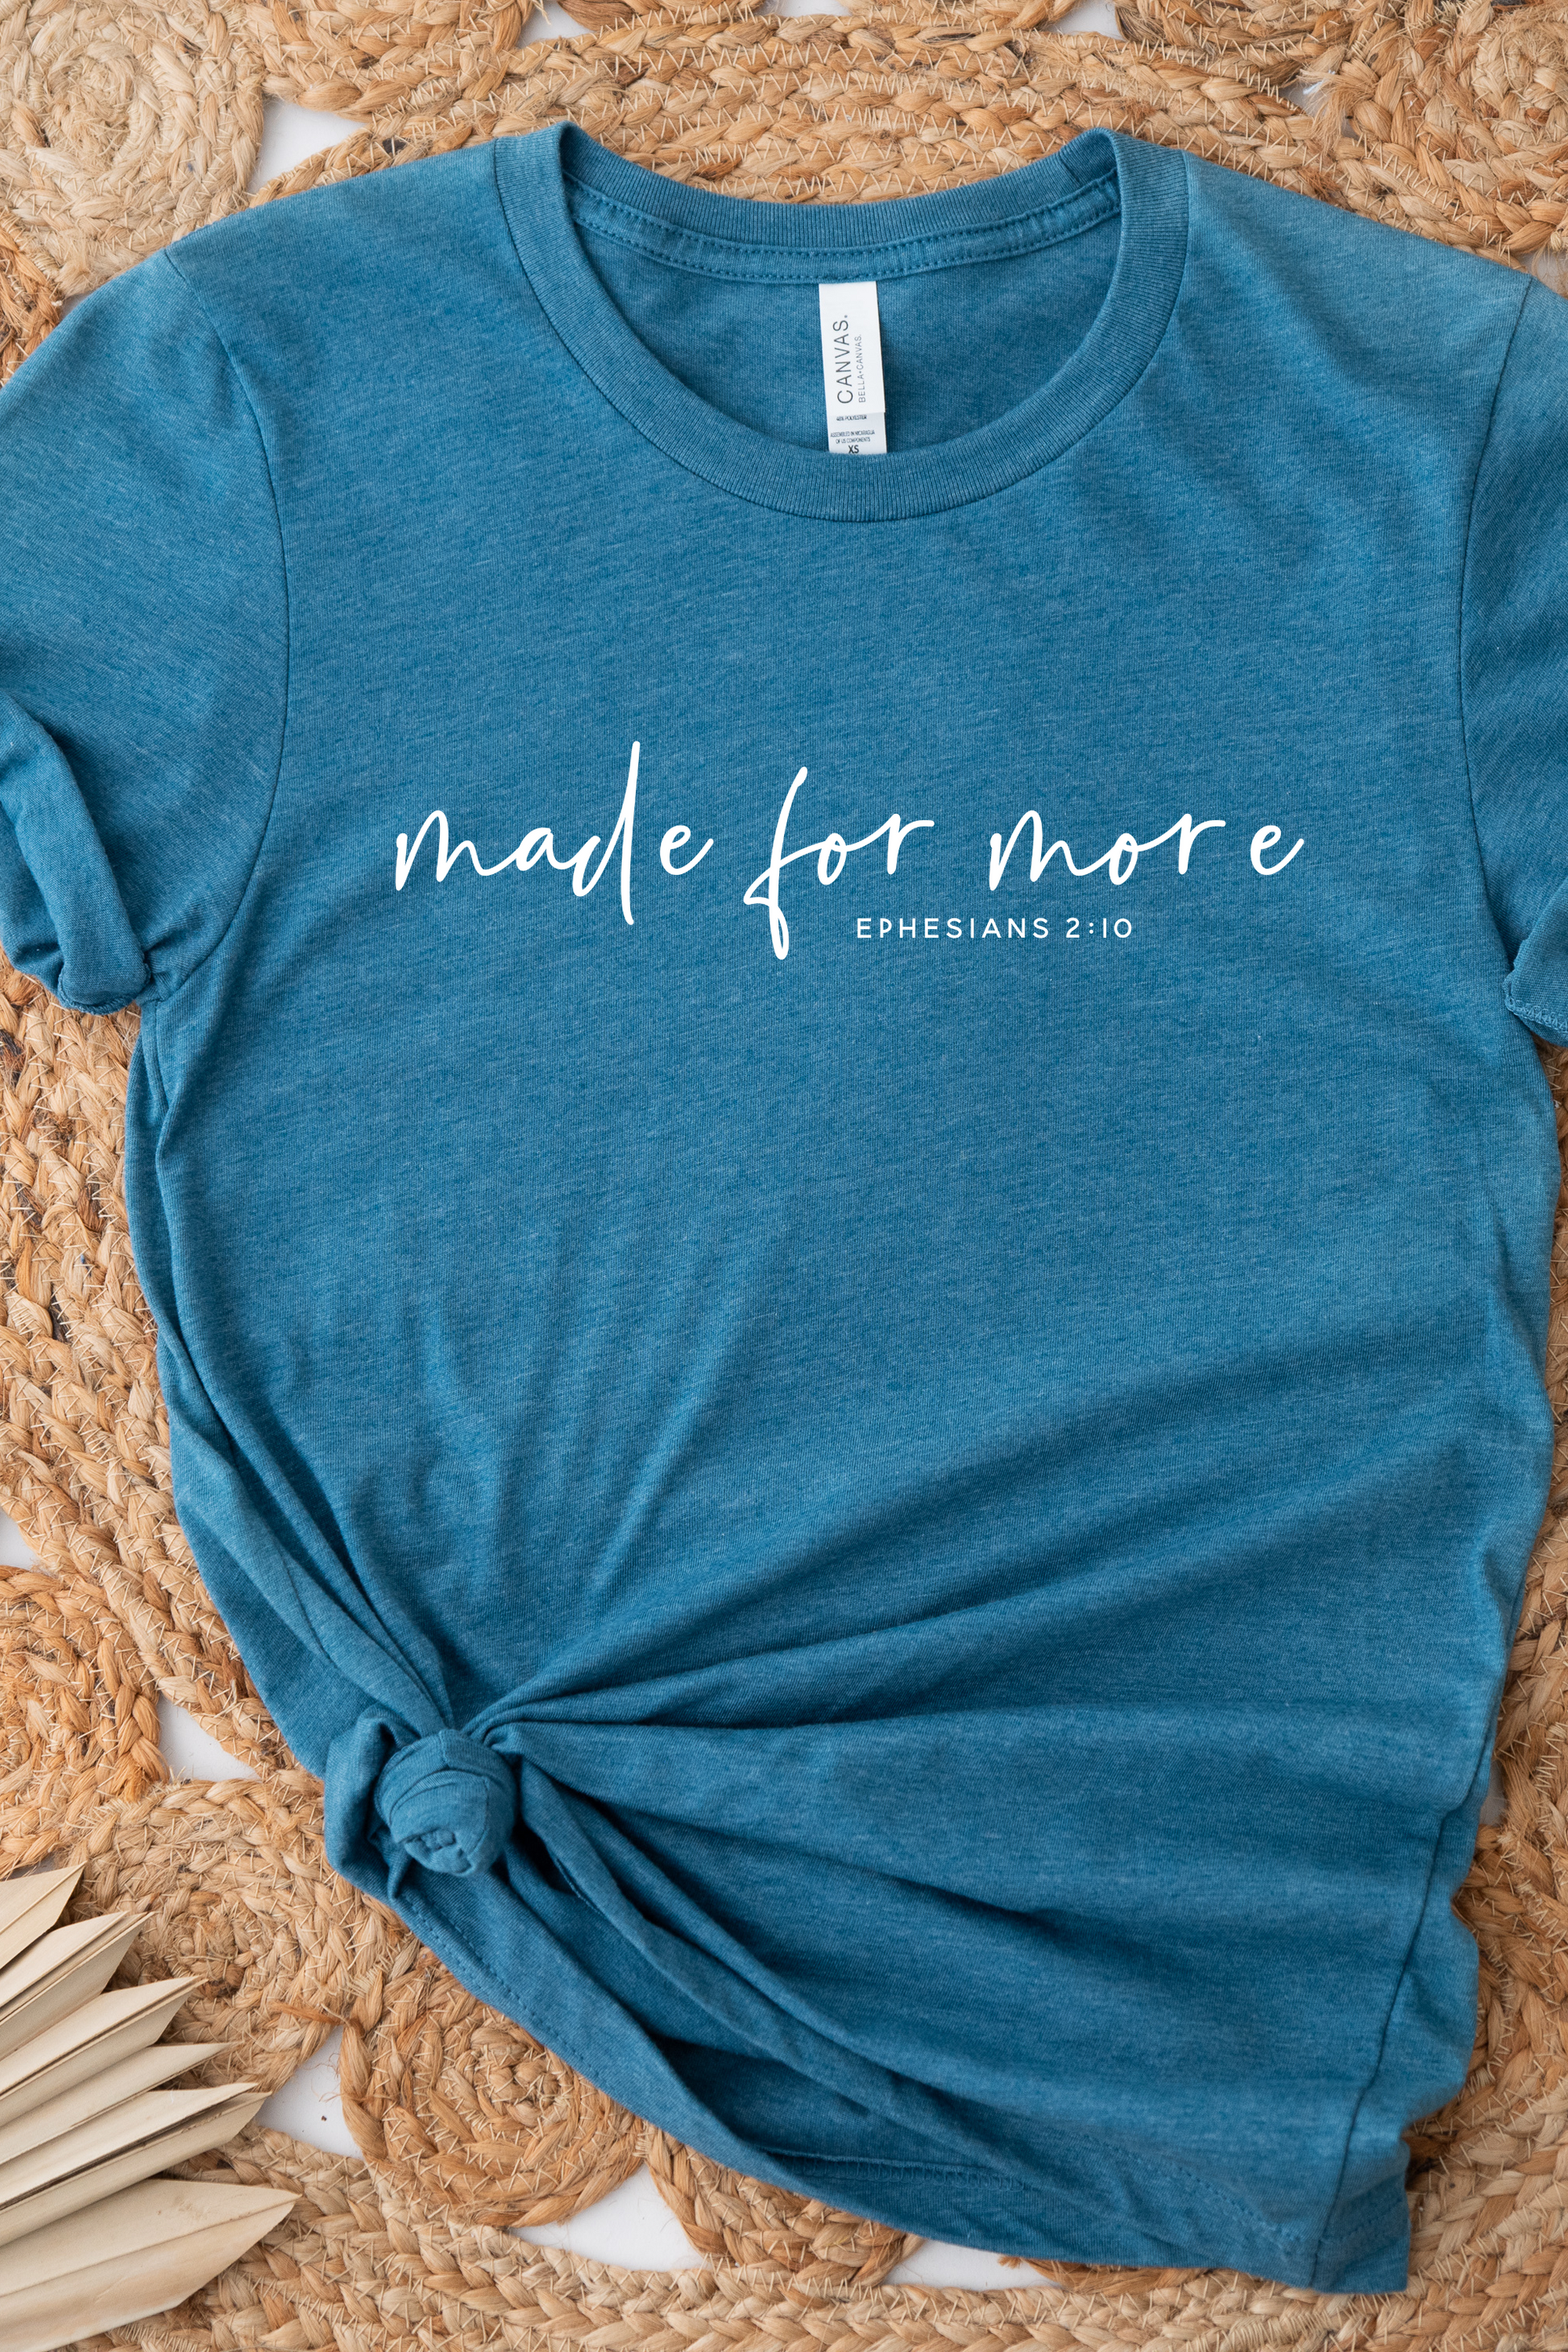 MADE FOR MORE TEE(BELLA CANVAS) - Body By J'ne